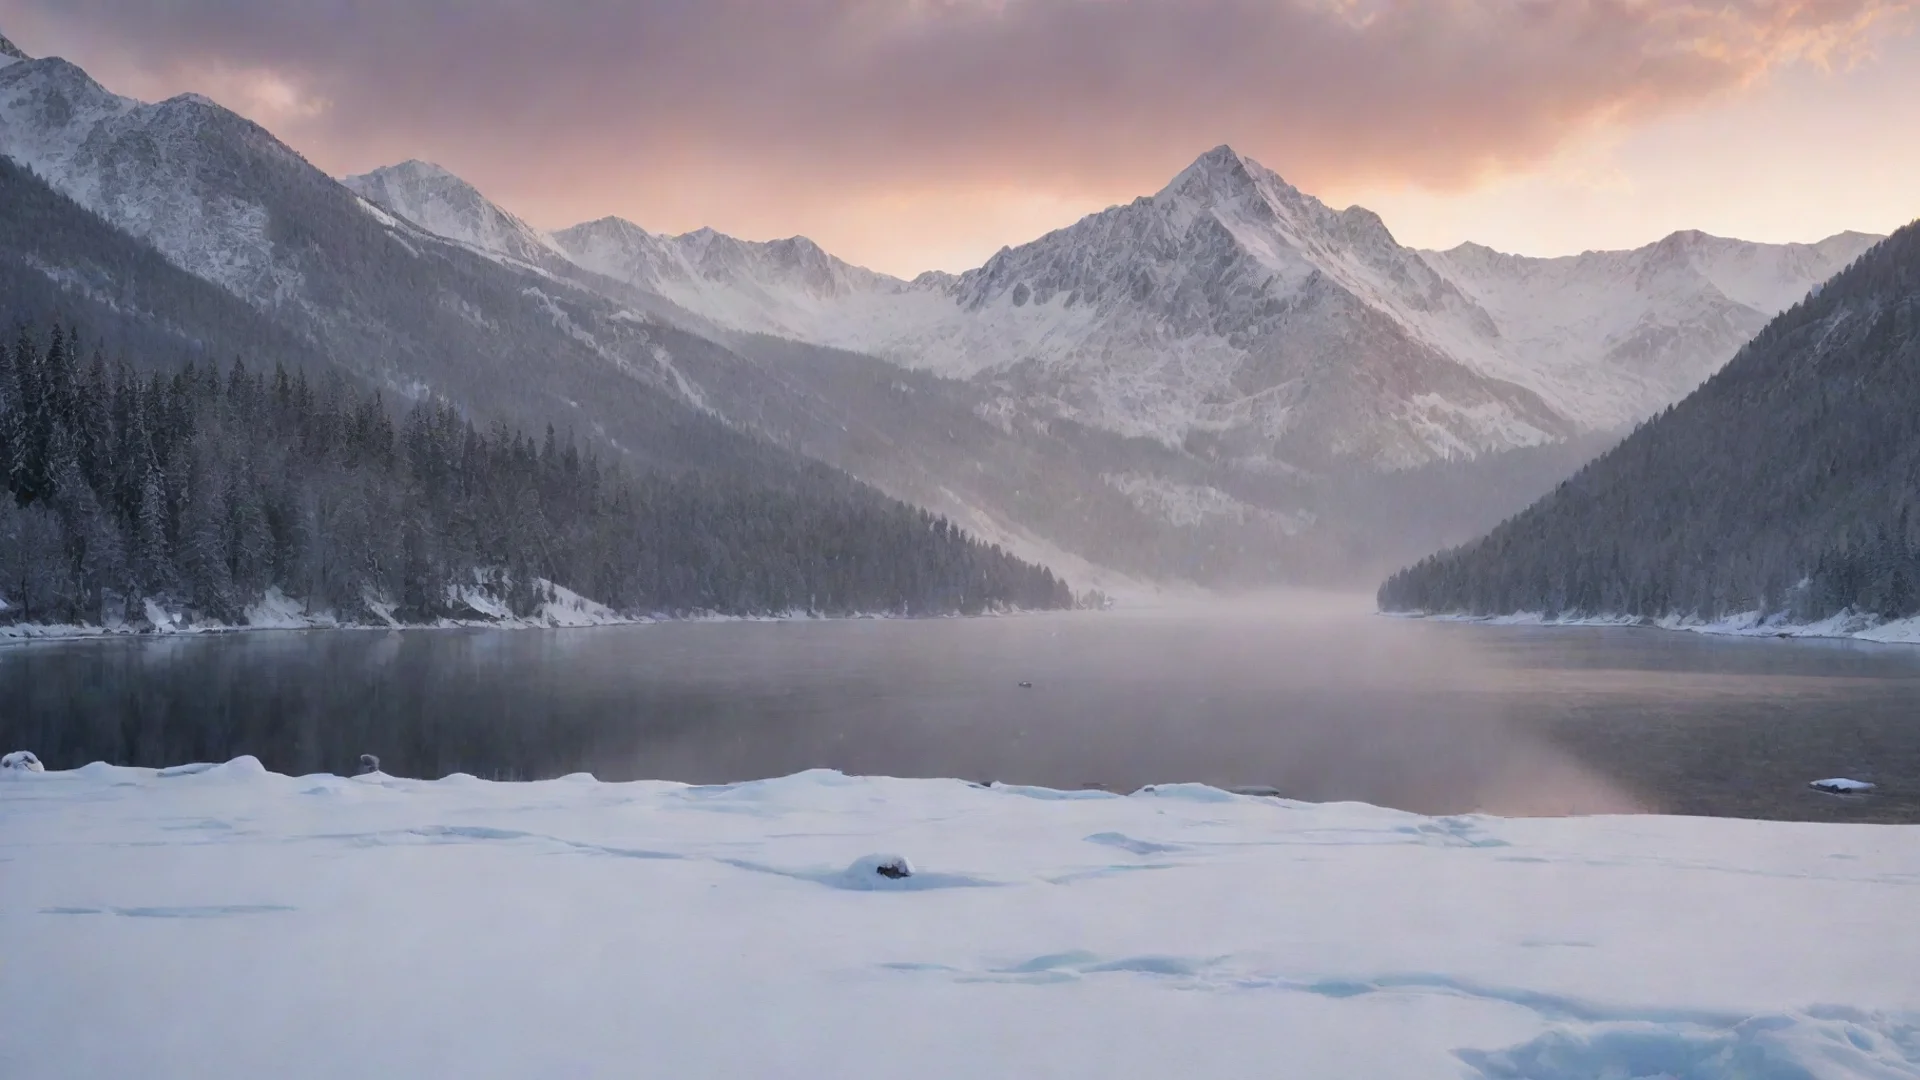 amazing frozen lake with snow falling down in a mountainous background and during a sunset awesome portrait 2 wide